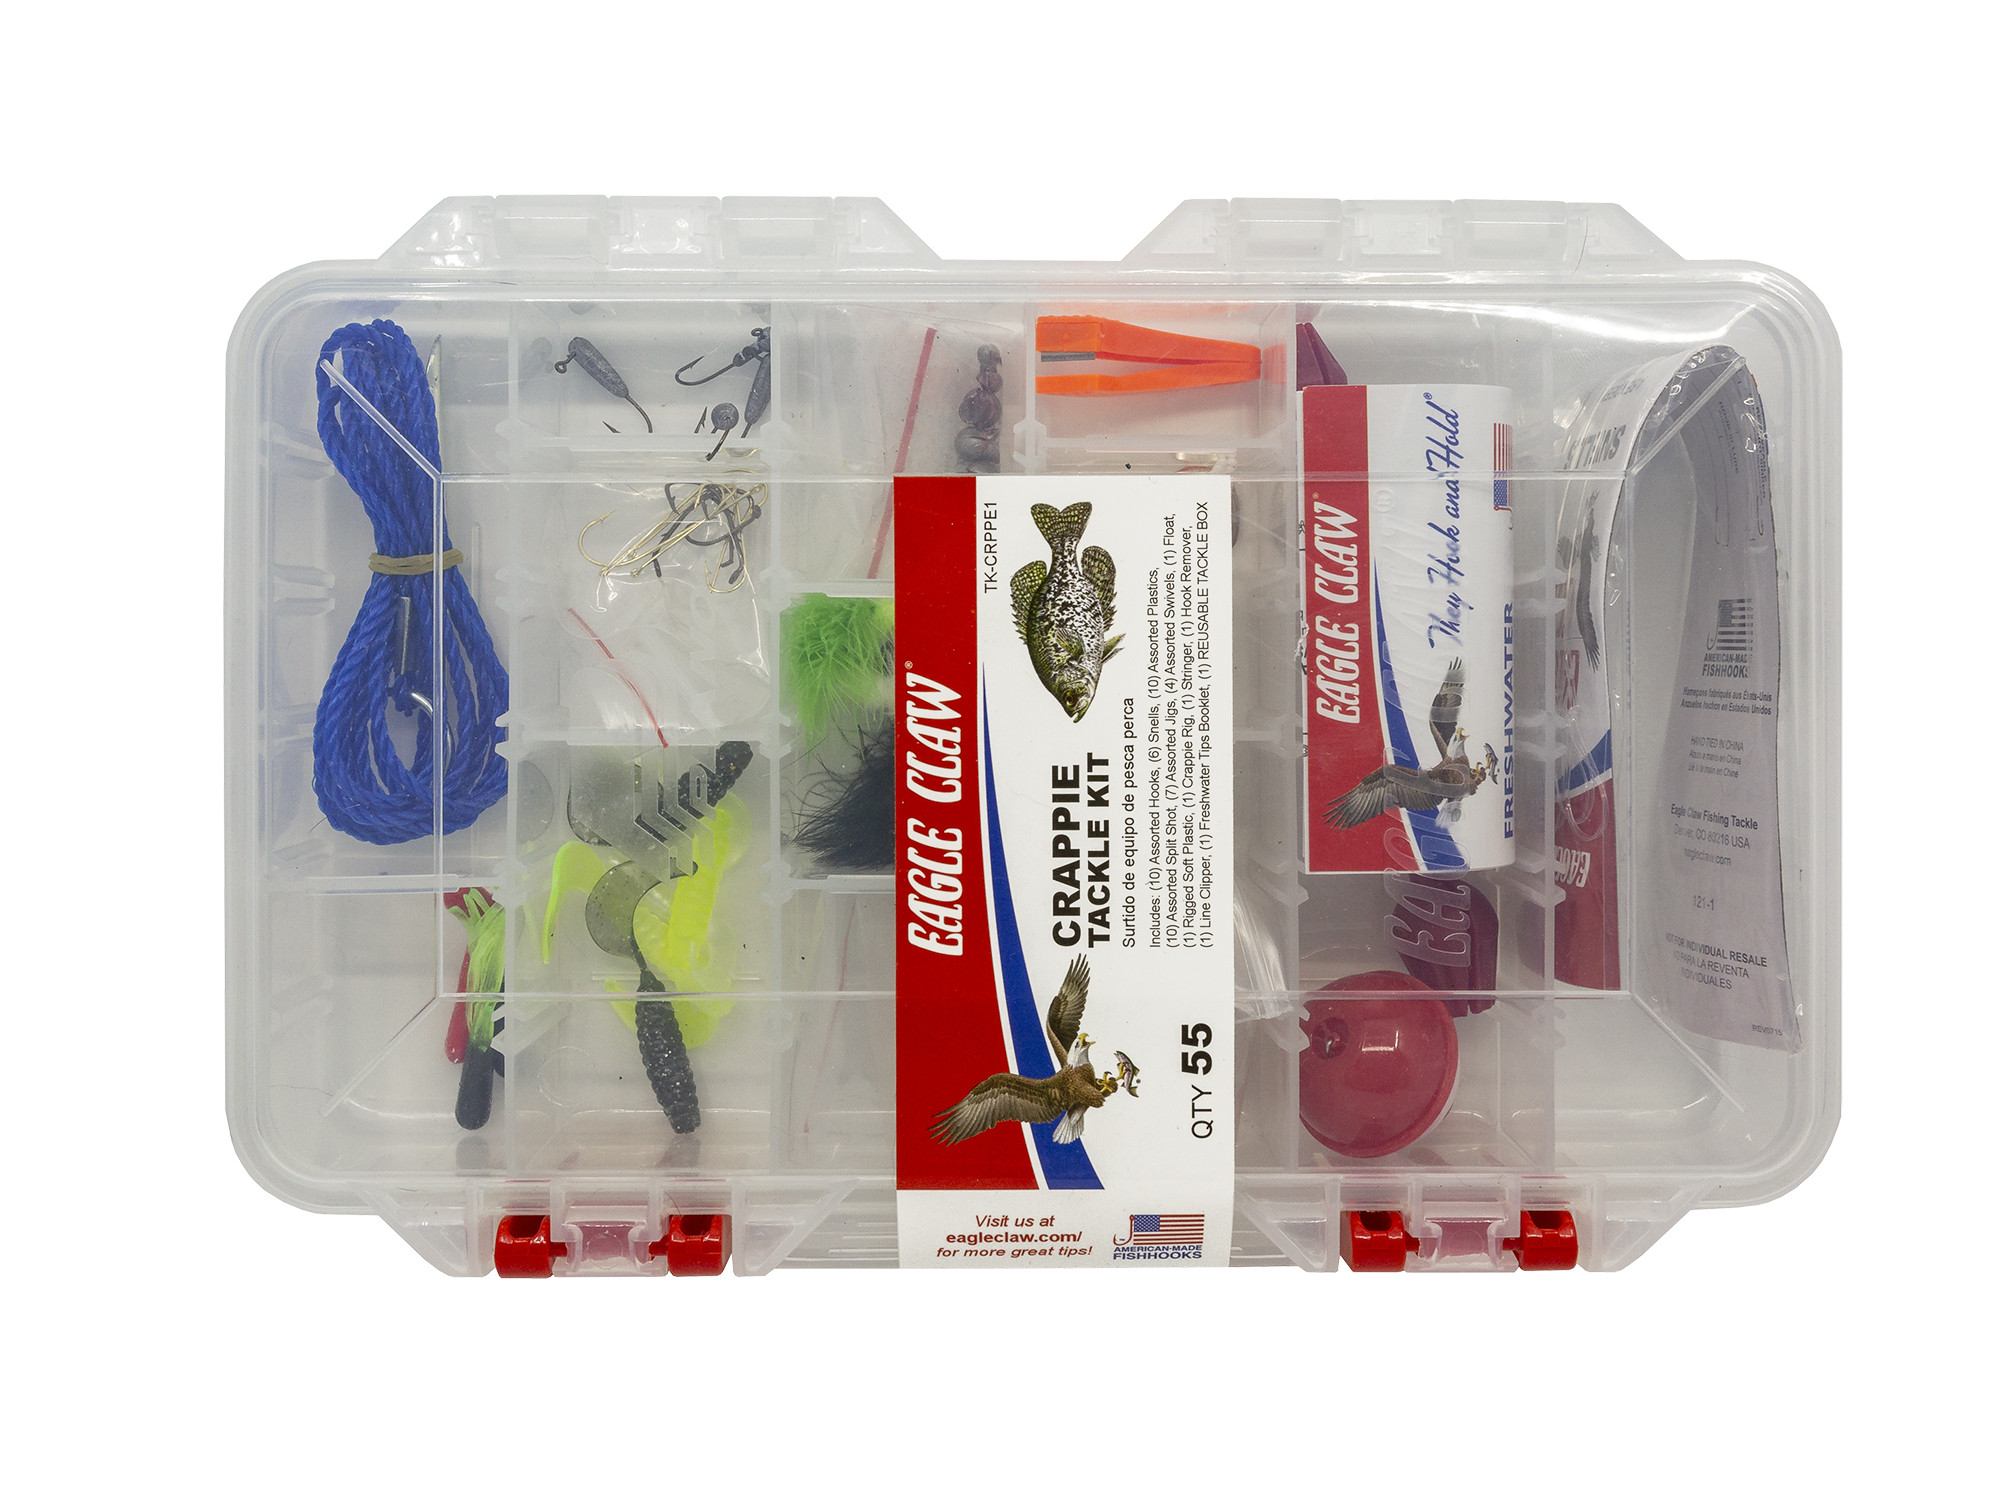 180 Pc. Crappie Tackle Kit